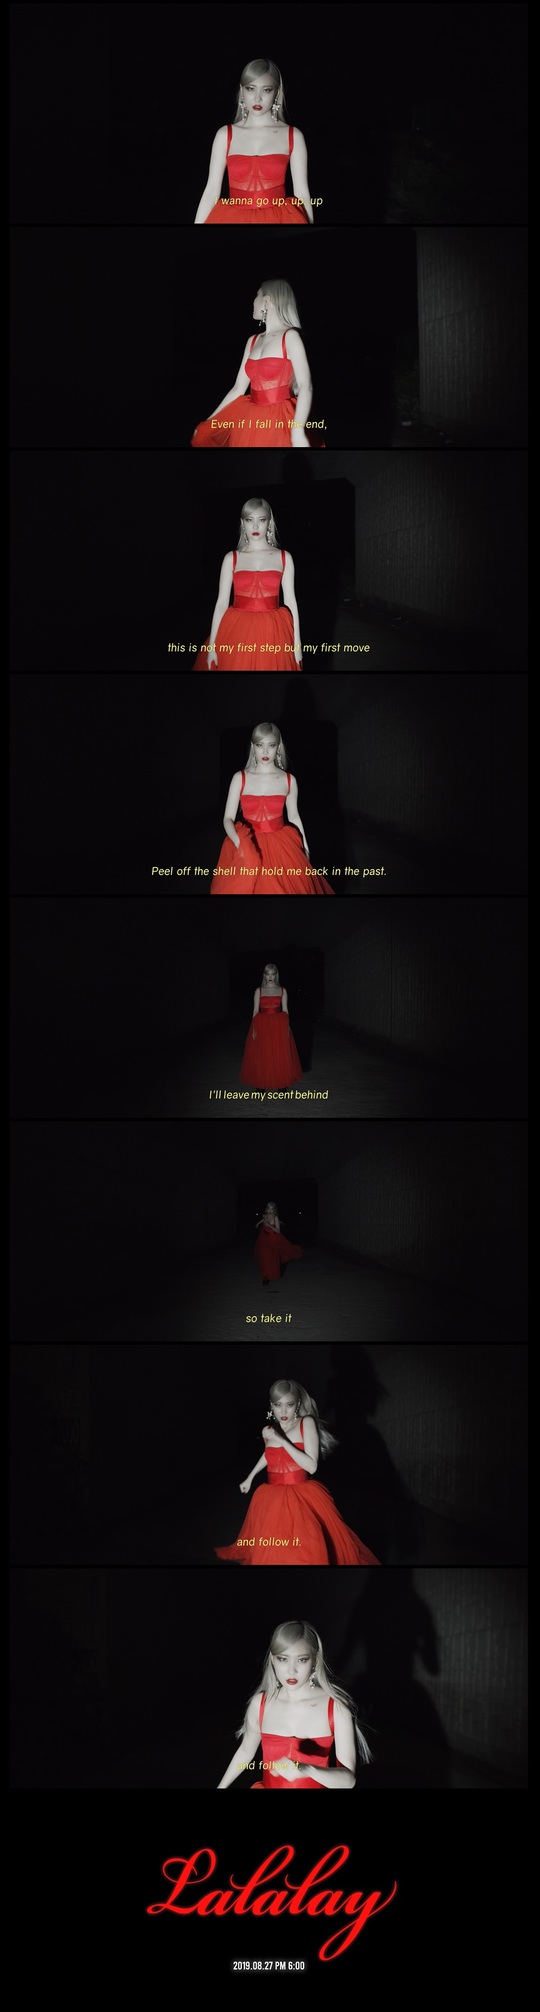 A new song, Flying (LALALAY) Message Teaser video by Singer Sunmi has been released.Makers Entertainment, a subsidiary company, posted Sunmis new single Flying Message Teaser video on the official SNS at 0 am on August 23.About 45 seconds of video shows Sunmi, who has blonde hair and intense RED lip and RED dress, which emits alluring charm.Message Teaser is a video of Message that conveys the contents to be expressed through the new song Flying to Sunmis voice.Sunmis musical identity and challenging spirit, I Wanna go up up.Even if I fall in the end, this is not my first step but my first move.Peel off the shell that hold me back in the past.Ill Leave My Scent Behind So Take It and Follow It.Narration Message is intensely embedded in the brain, raising expectations for a comeback.In particular, Sunmis acting, which gazes at the camera with a sensual yet fascinating color and dreamy eyes, gave an intense impact as if watching a movie trailer.The new song Nalari is Sunmis own song, inspired by the world tour Warning (WARNING) during the Mexican tour.It is expected to capture the eyes and ears of the public with unique lyrics and Sunmis unique performances, pouring through poetic metaphors and direct speech over dance-hall and Latin-style exotic sounds.On the other hand, Sunmi will release a new single Nalari at 6 pm on the 27th and start full-scale broadcasting activities.The fan showcase commemorating the release of Nalari held at Yes 24 Live Hall in Gwangjang-dong, Gwangjin-gu, Seoul at 8 pm on the same day can be seen live on Naver V LIVE Sunmi channel.hwang hye-jin